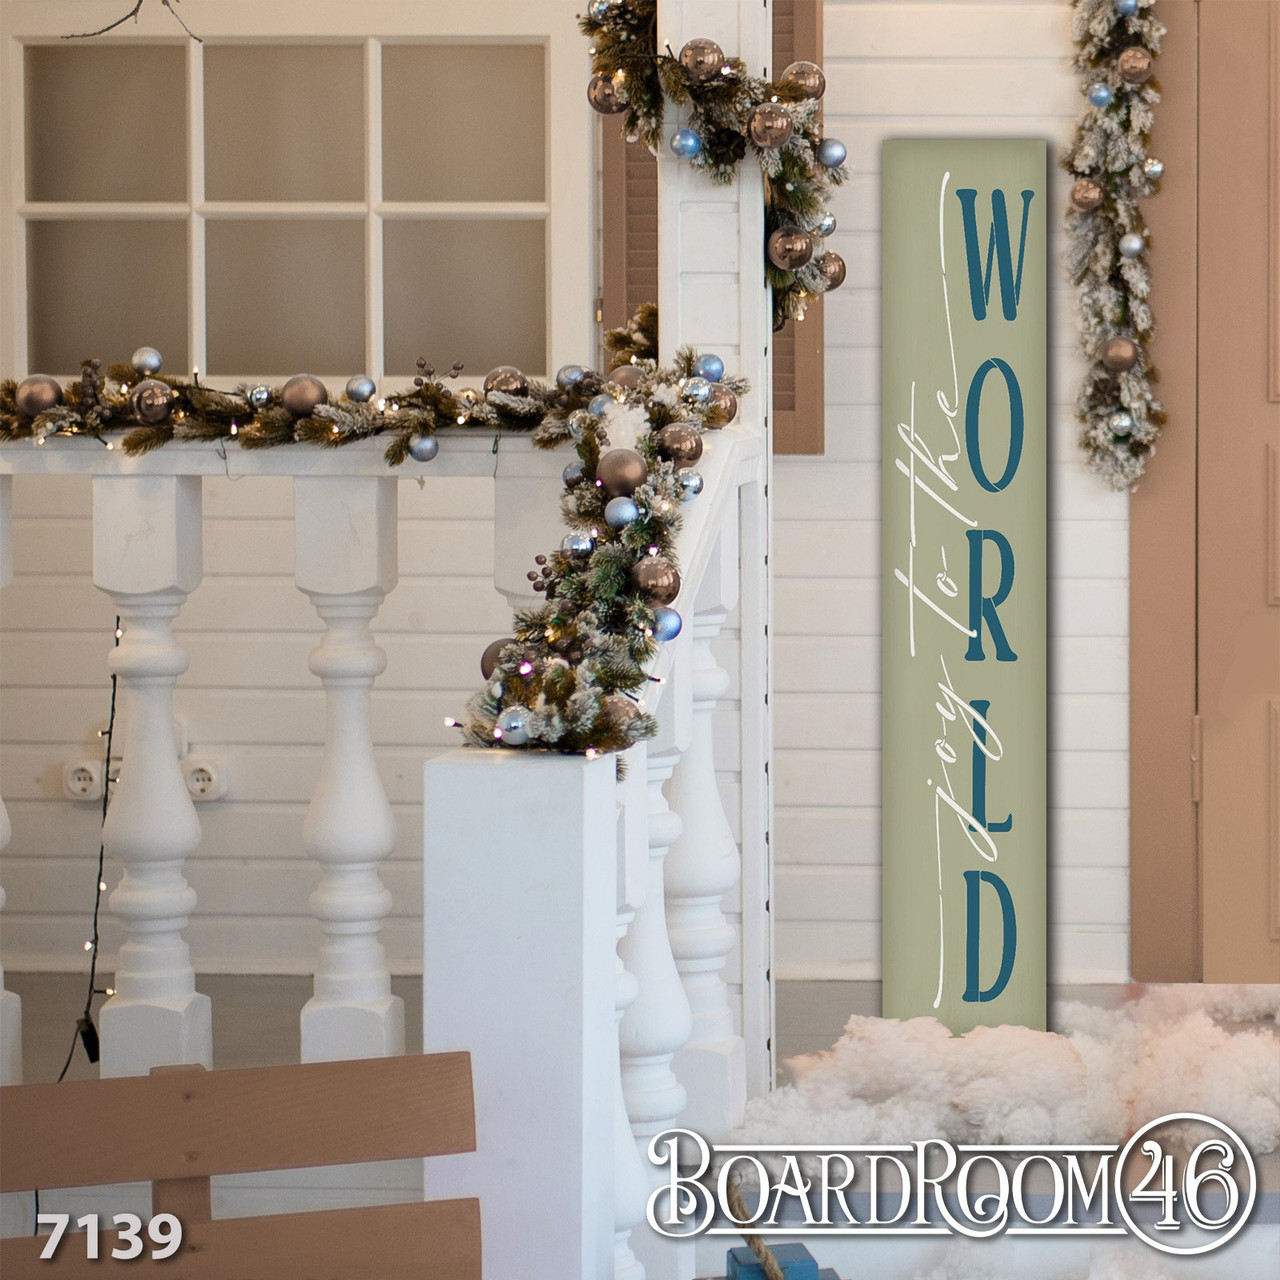 Script Joy to The World Tall Porch Sign Stencil by StudioR12 - Select Size - USA Made - Reusable Christmas Carol Vertical Leaner Template for DIY Holiday Outdoor Welcome Decor - STCL7139 (5ft)